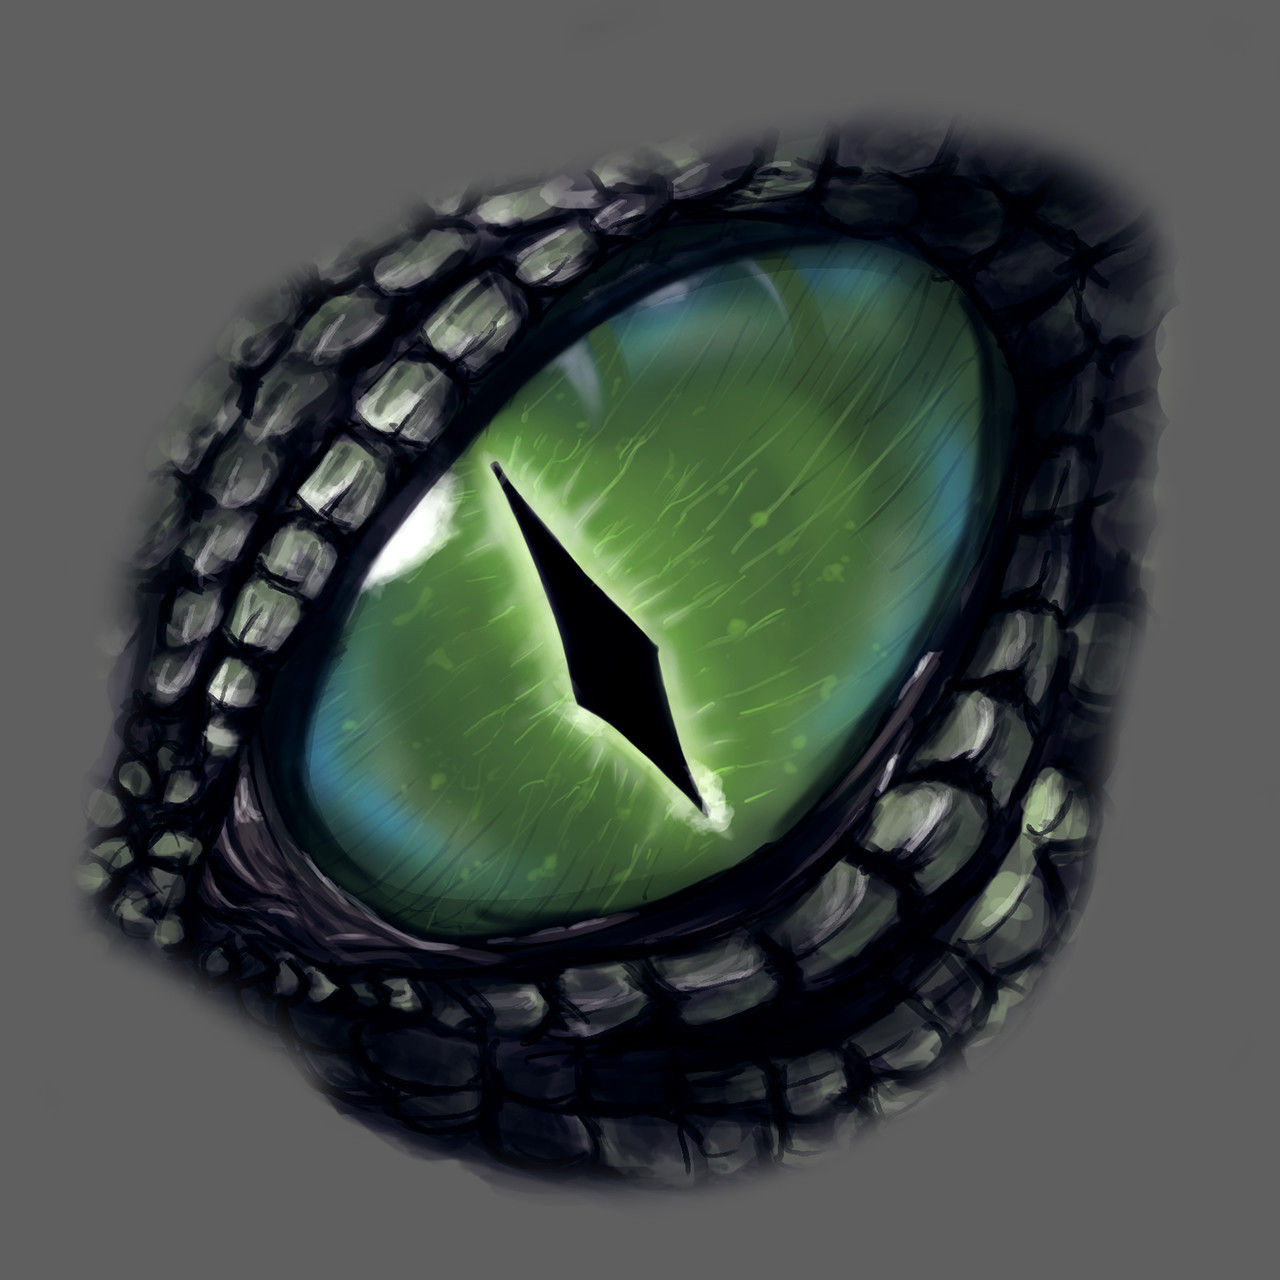 Dragon Eyes Stock Photos, Images and Backgrounds for Free Download